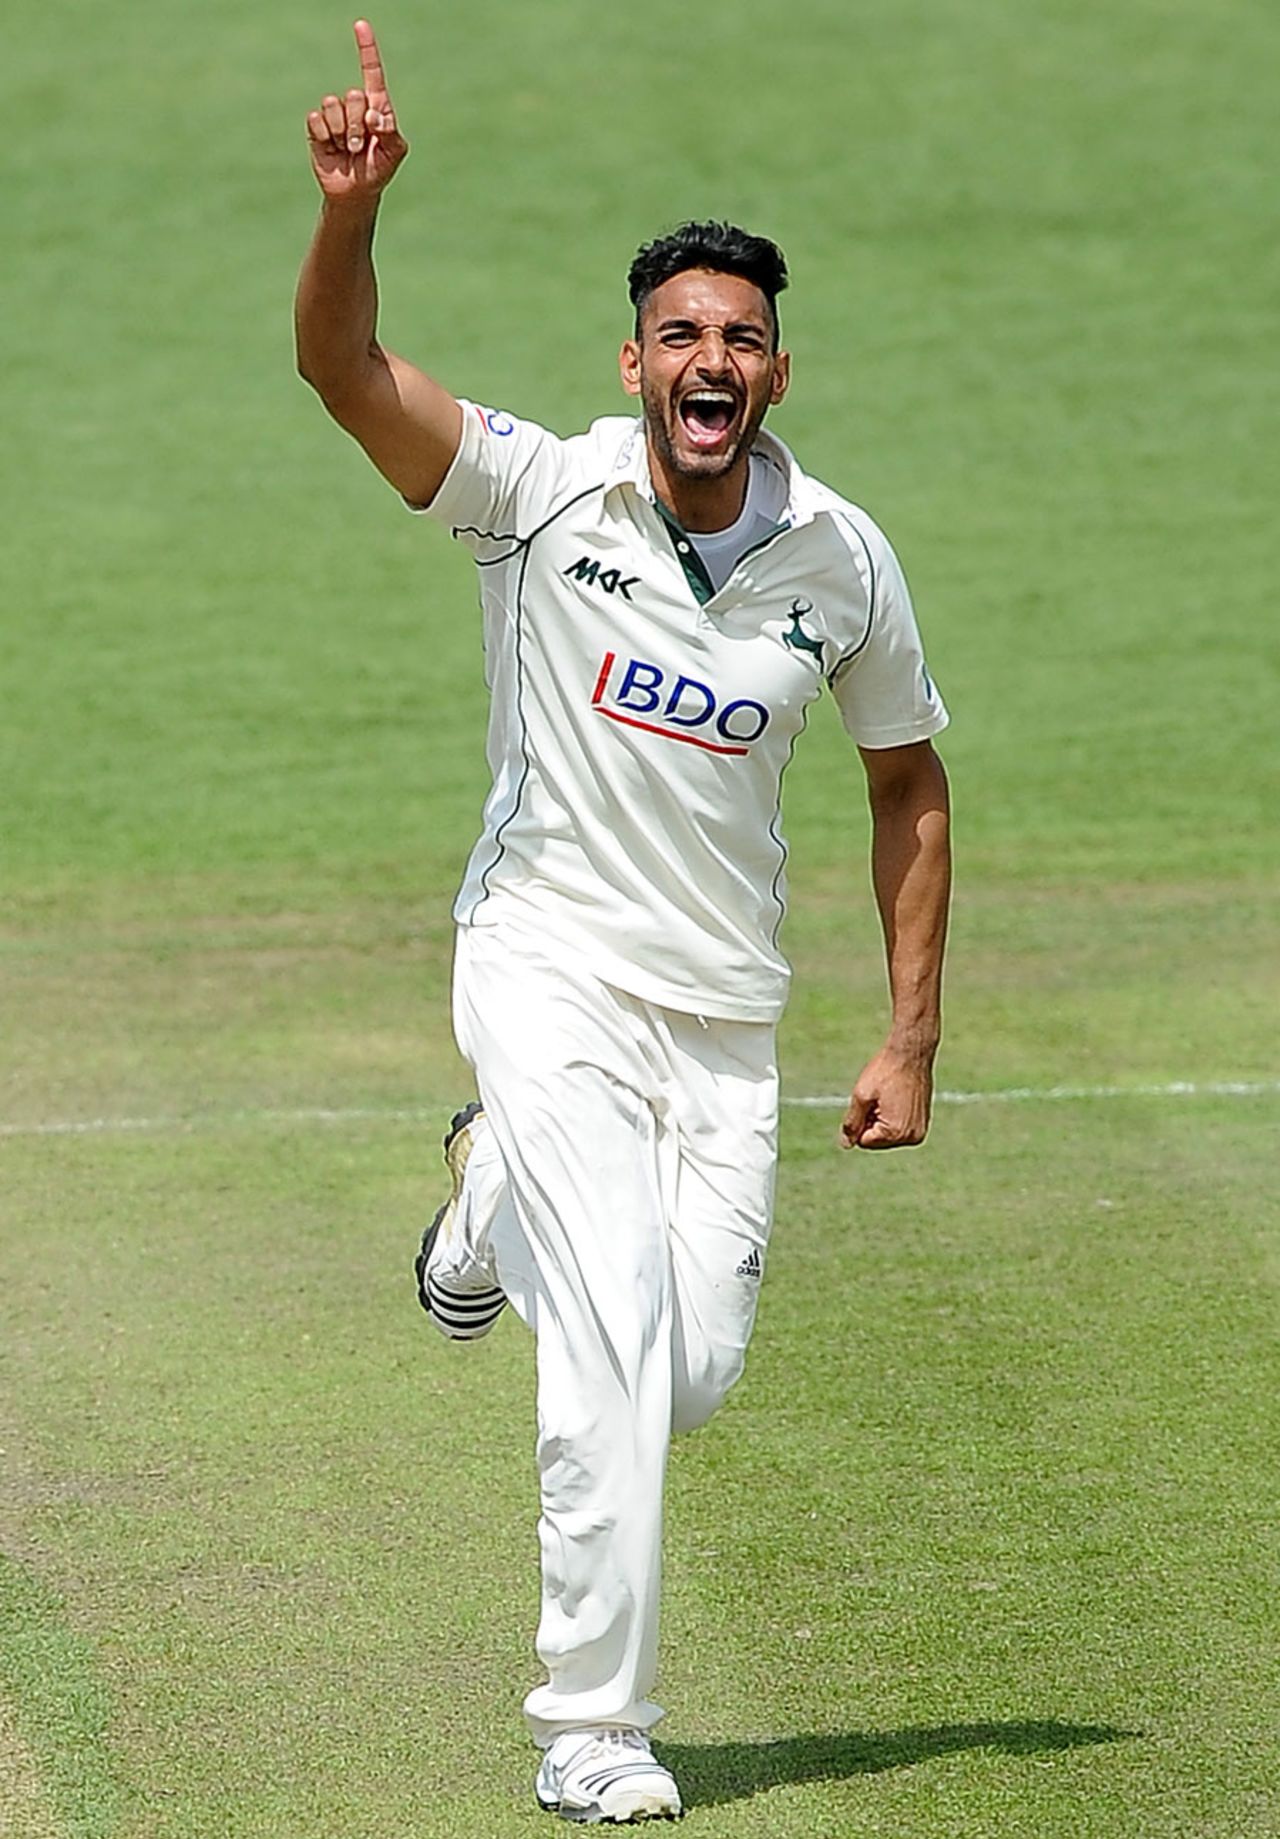 Ajmal Shahzad made the initial breakthrough, County Championship, Division One, Hove, 2nd day, June, 1, 2013